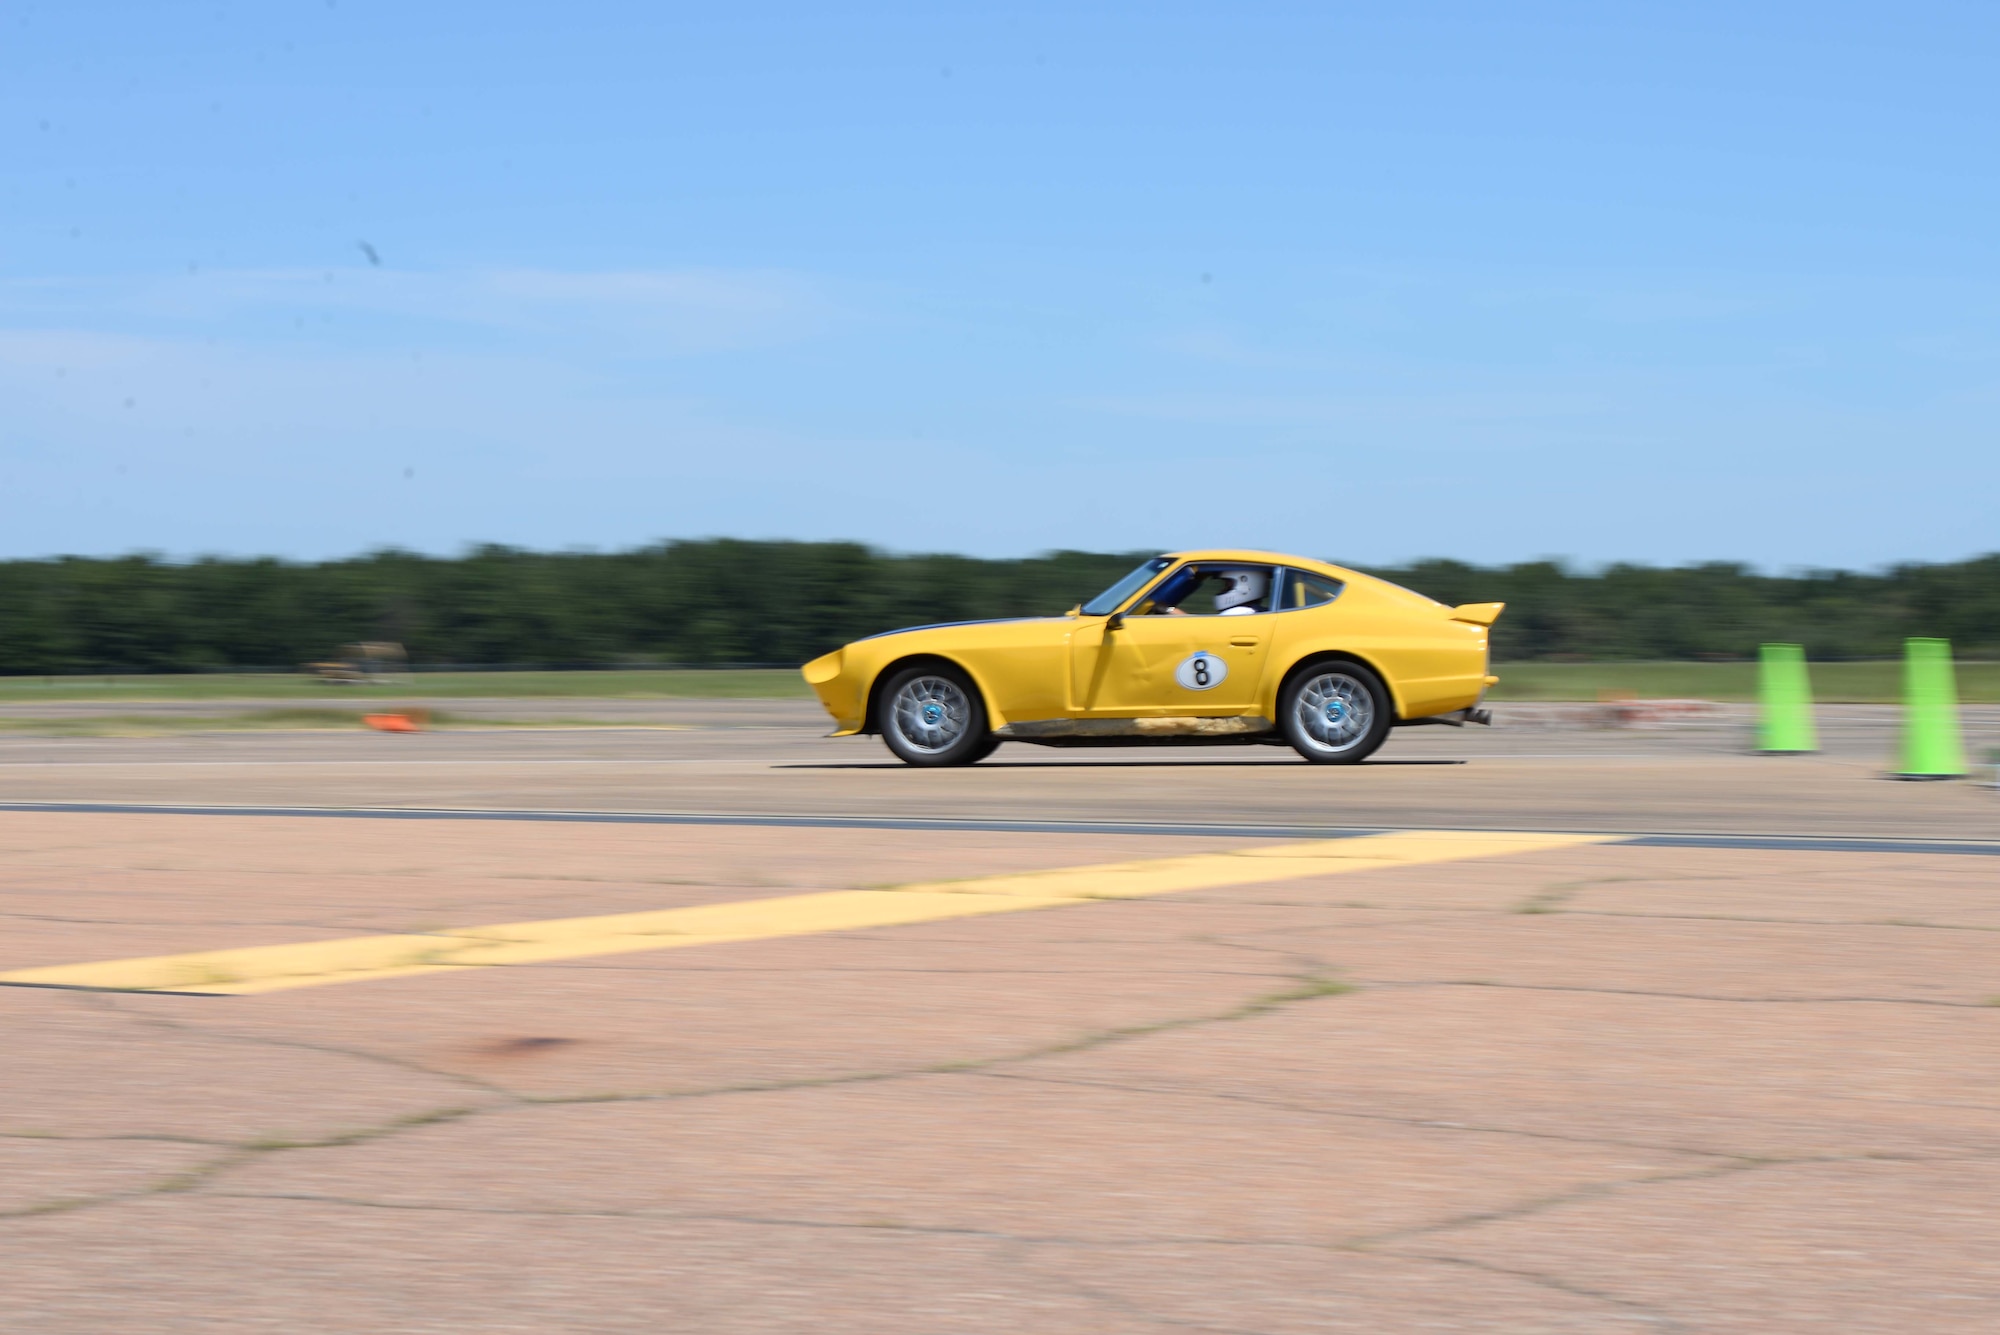 Todd Jardee, of Brandon, Miss., drives his vehicle across the track Aug. 17, 2019, on Columbus Air Force Base, Miss. The race was a closed course on the Columbus AFB flight line, about a mile and a half long, set up with cones to guide the cars. (U.S. Air Force photo by Airman 1st Class Jake Jacobsen)